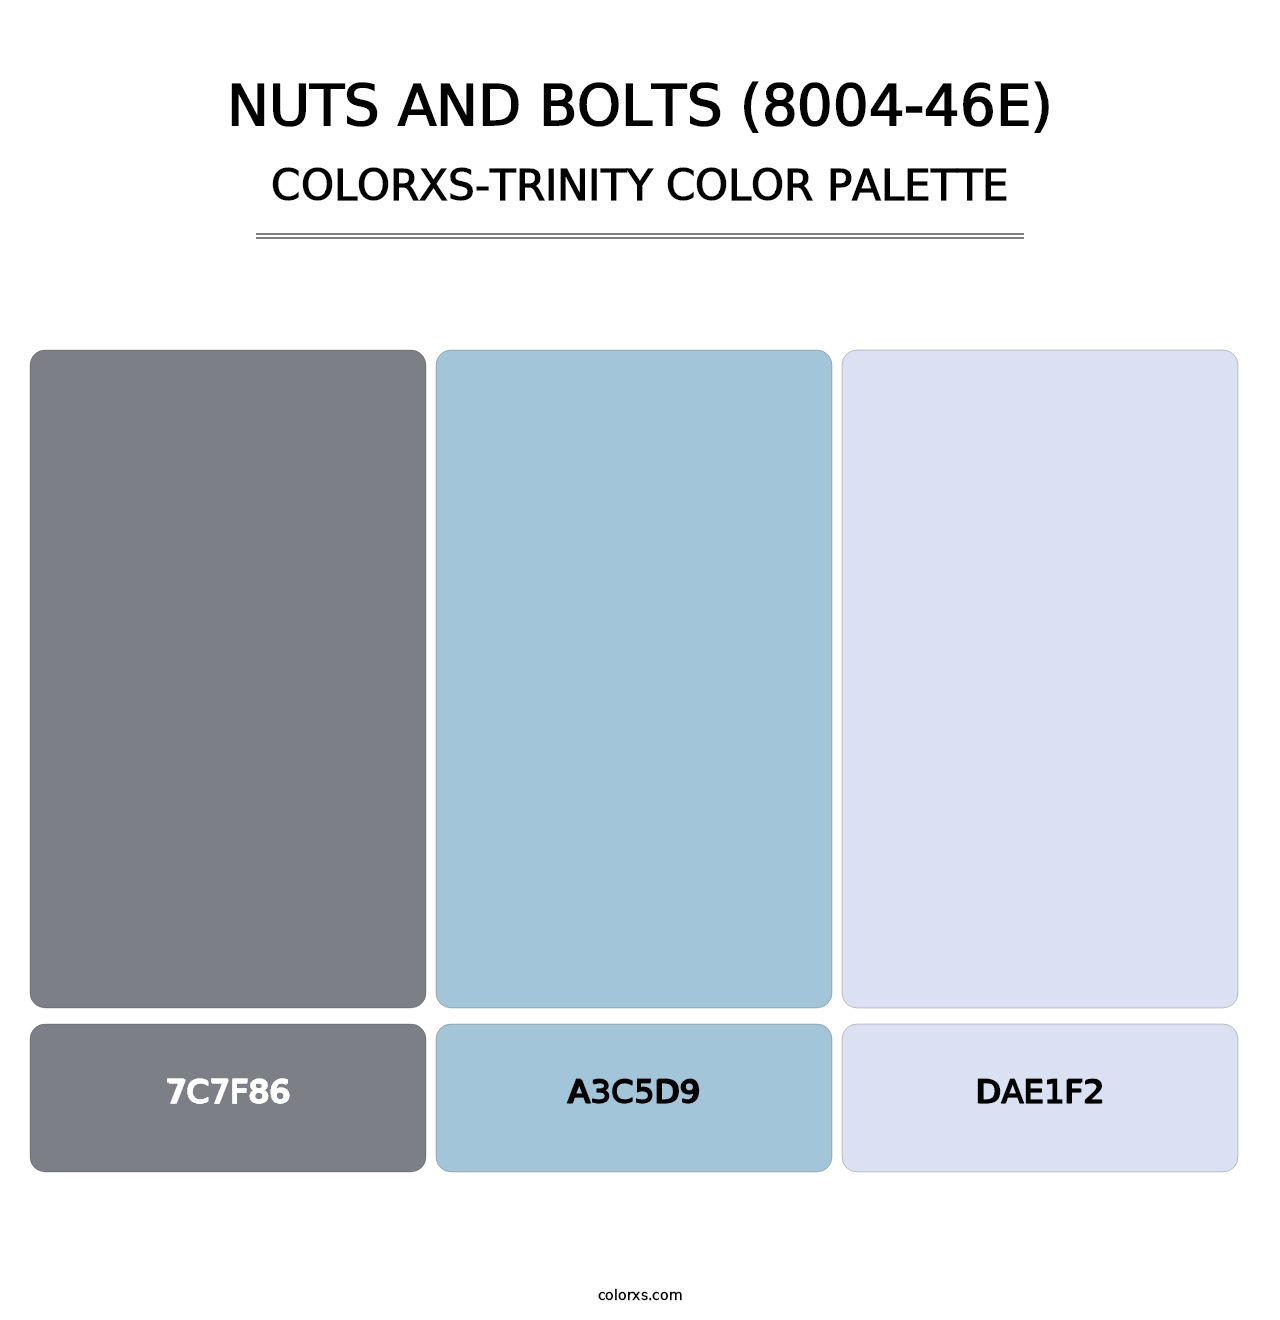 Nuts and Bolts (8004-46E) - Colorxs Trinity Palette